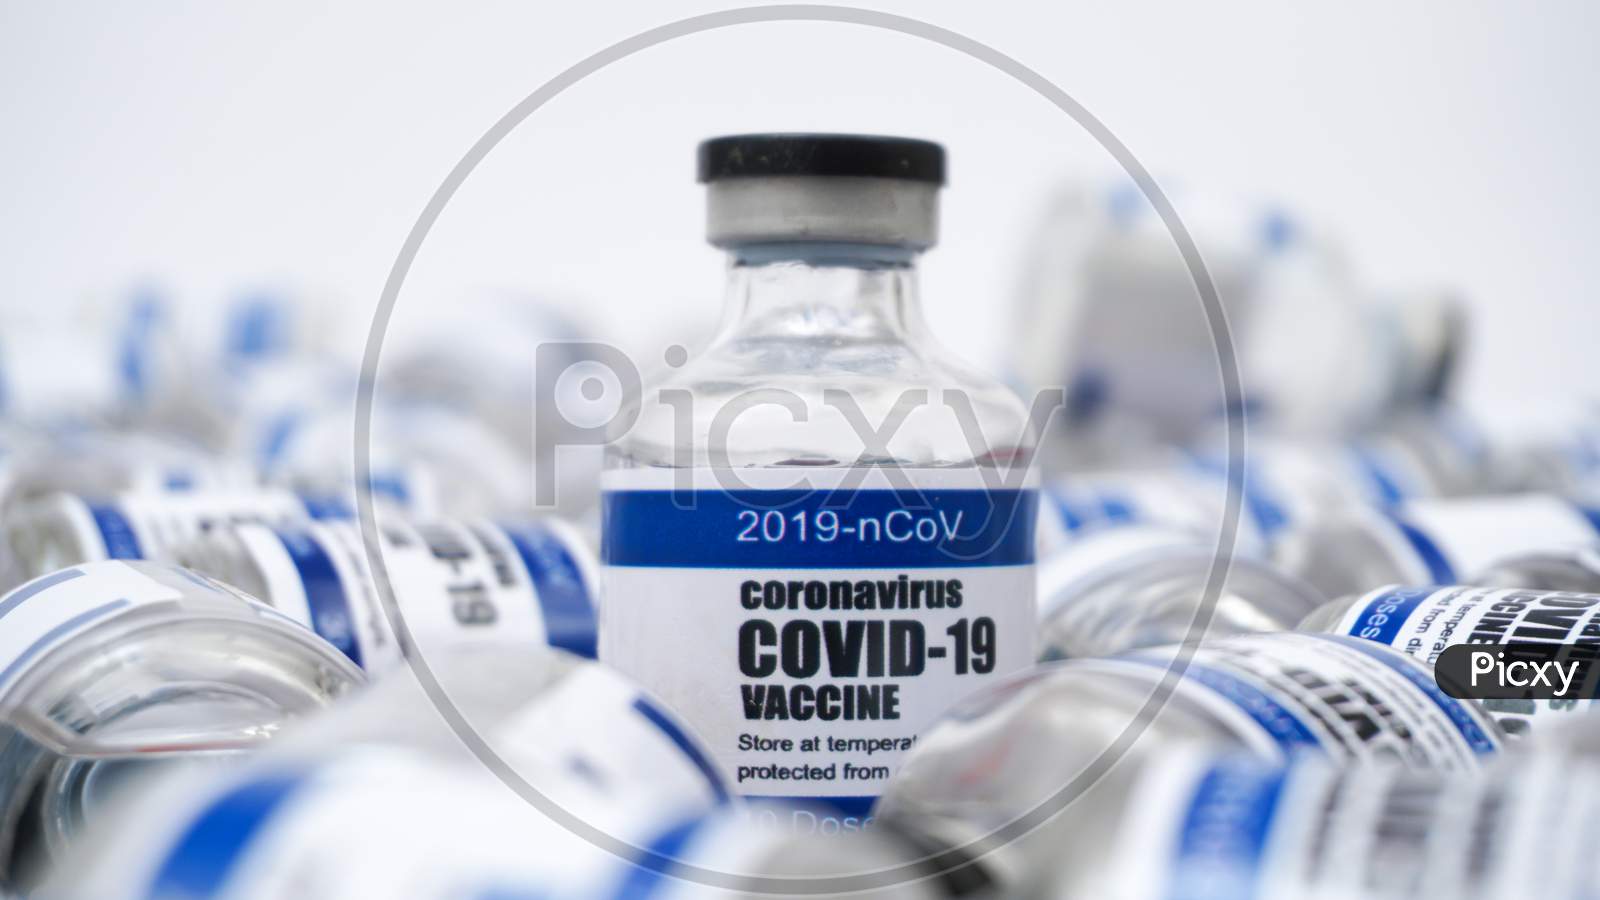 Covid-19 Corona Virus 2019-Ncov Vaccine Injection Vials Medicine Drug Bottles. Vaccination, Immunization, Testing, Treatment To Cure Covid-19 Corona Virus Infection. Healthcare And Medical Concept.